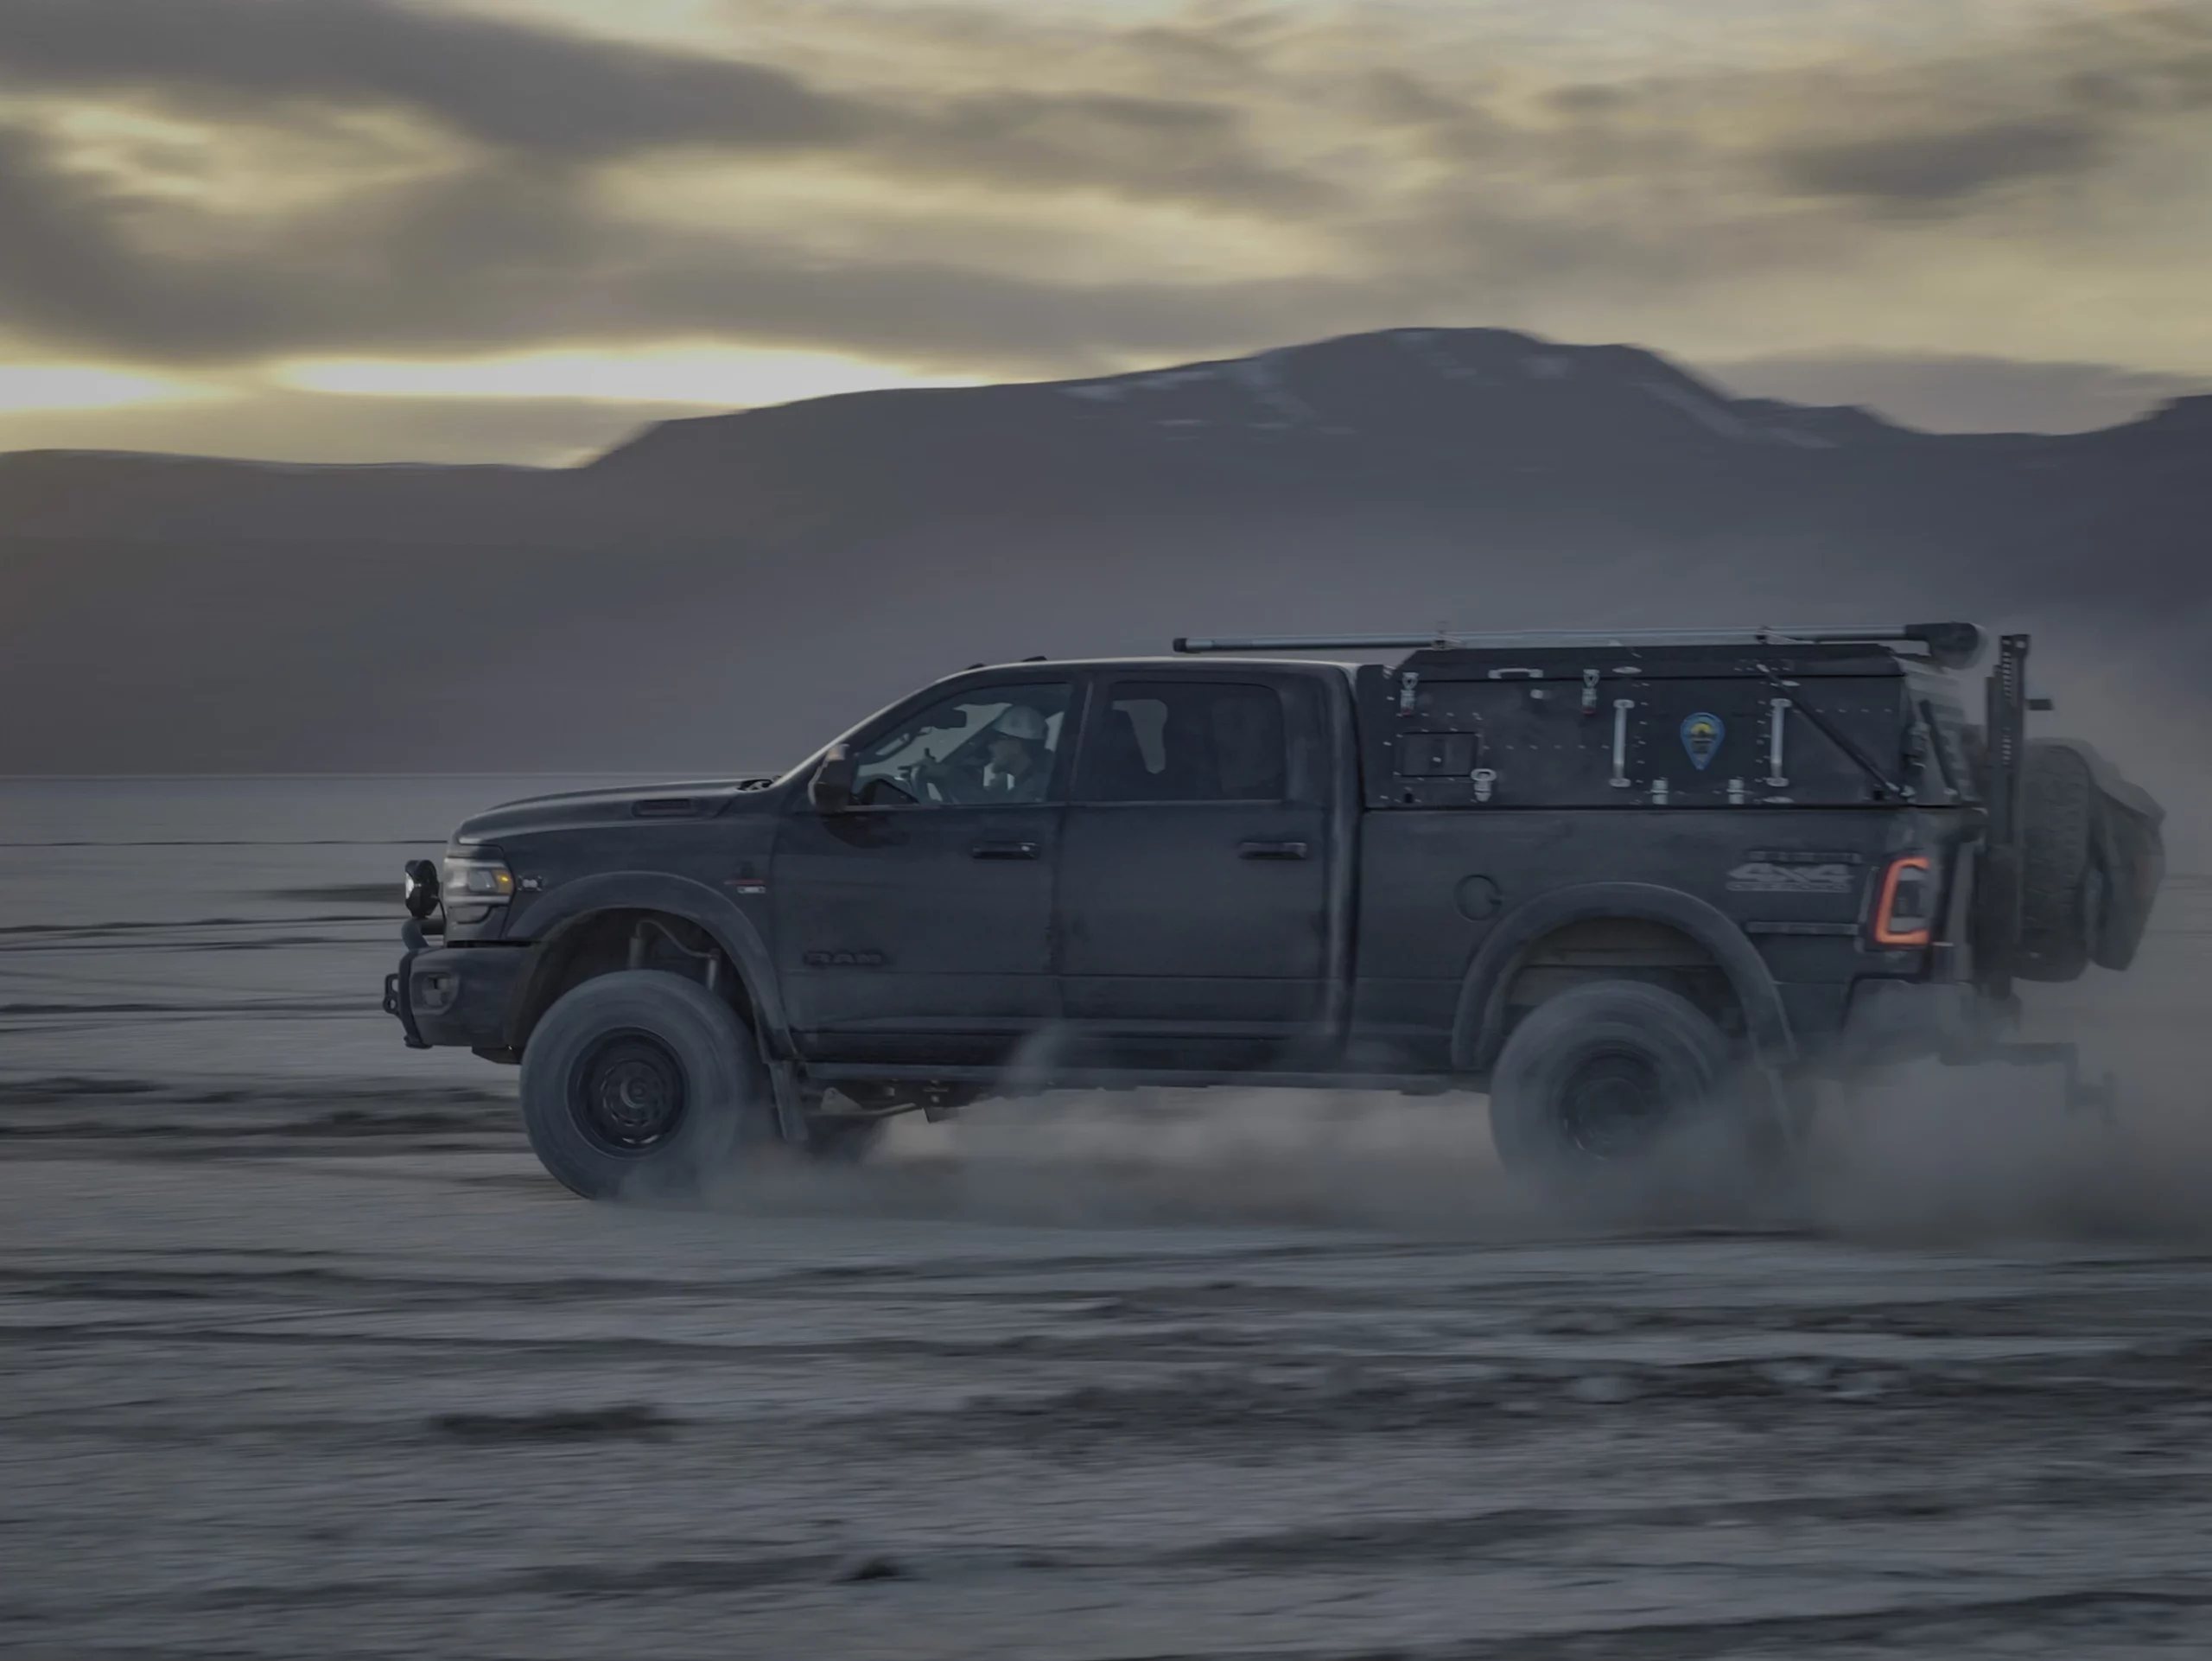 A rugged, black pickup truck drives across a barren, dusty landscape with mountains in the background at dusk. The vehicle, adorned with Skinny Guy branding and equipped for an overland expedition, appears ready for adventure.